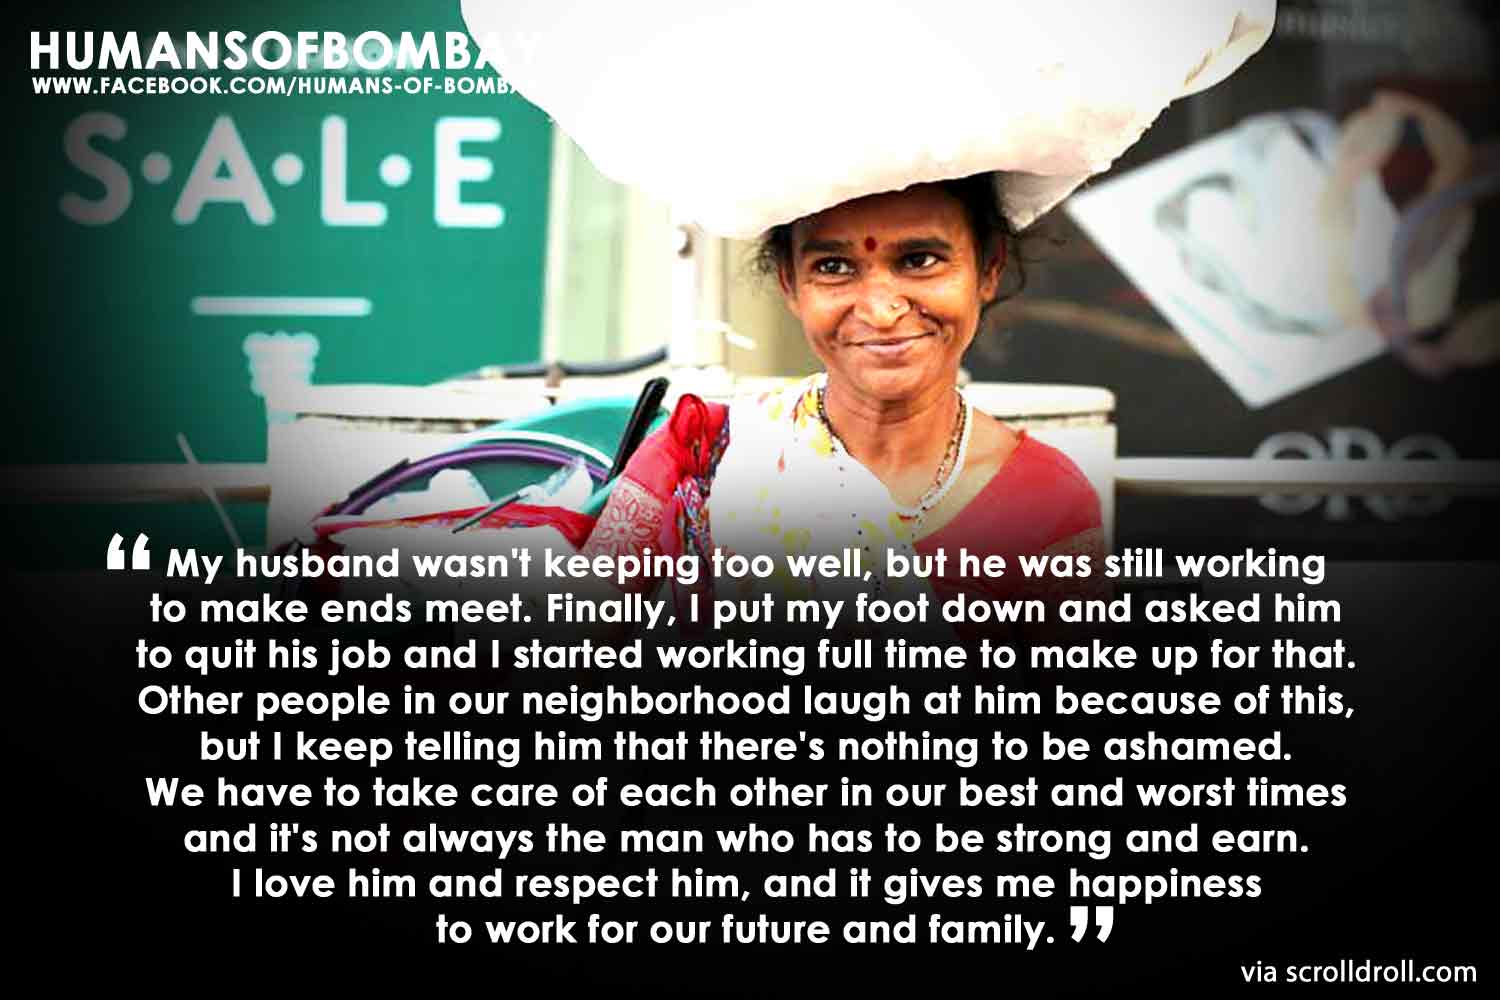 Humans of Bombay (25)